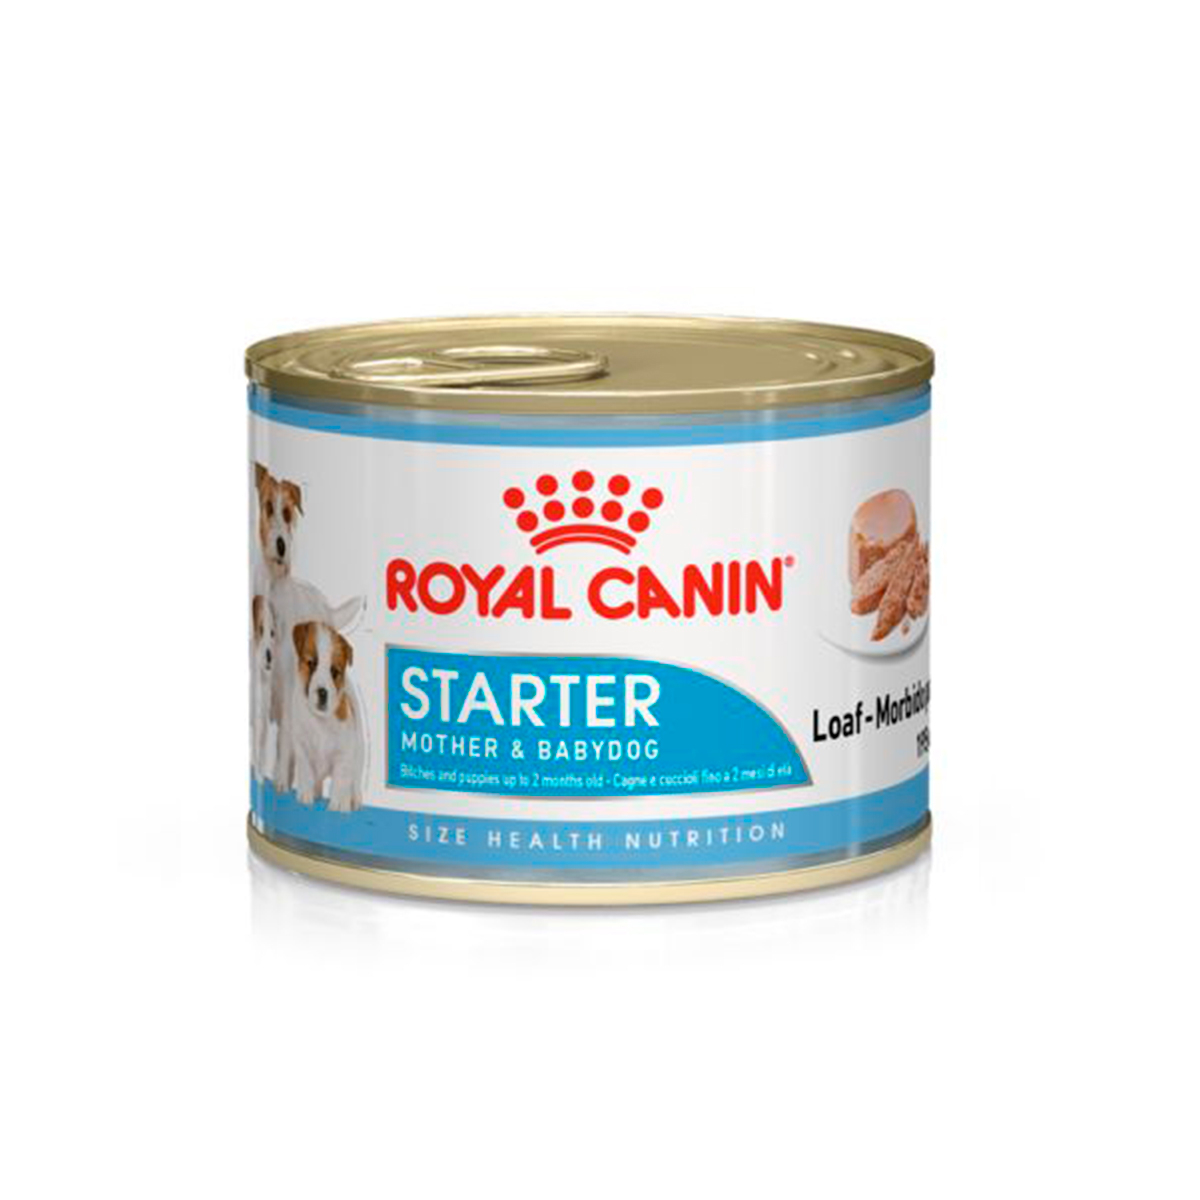 STARTER MOUSSE CANINE